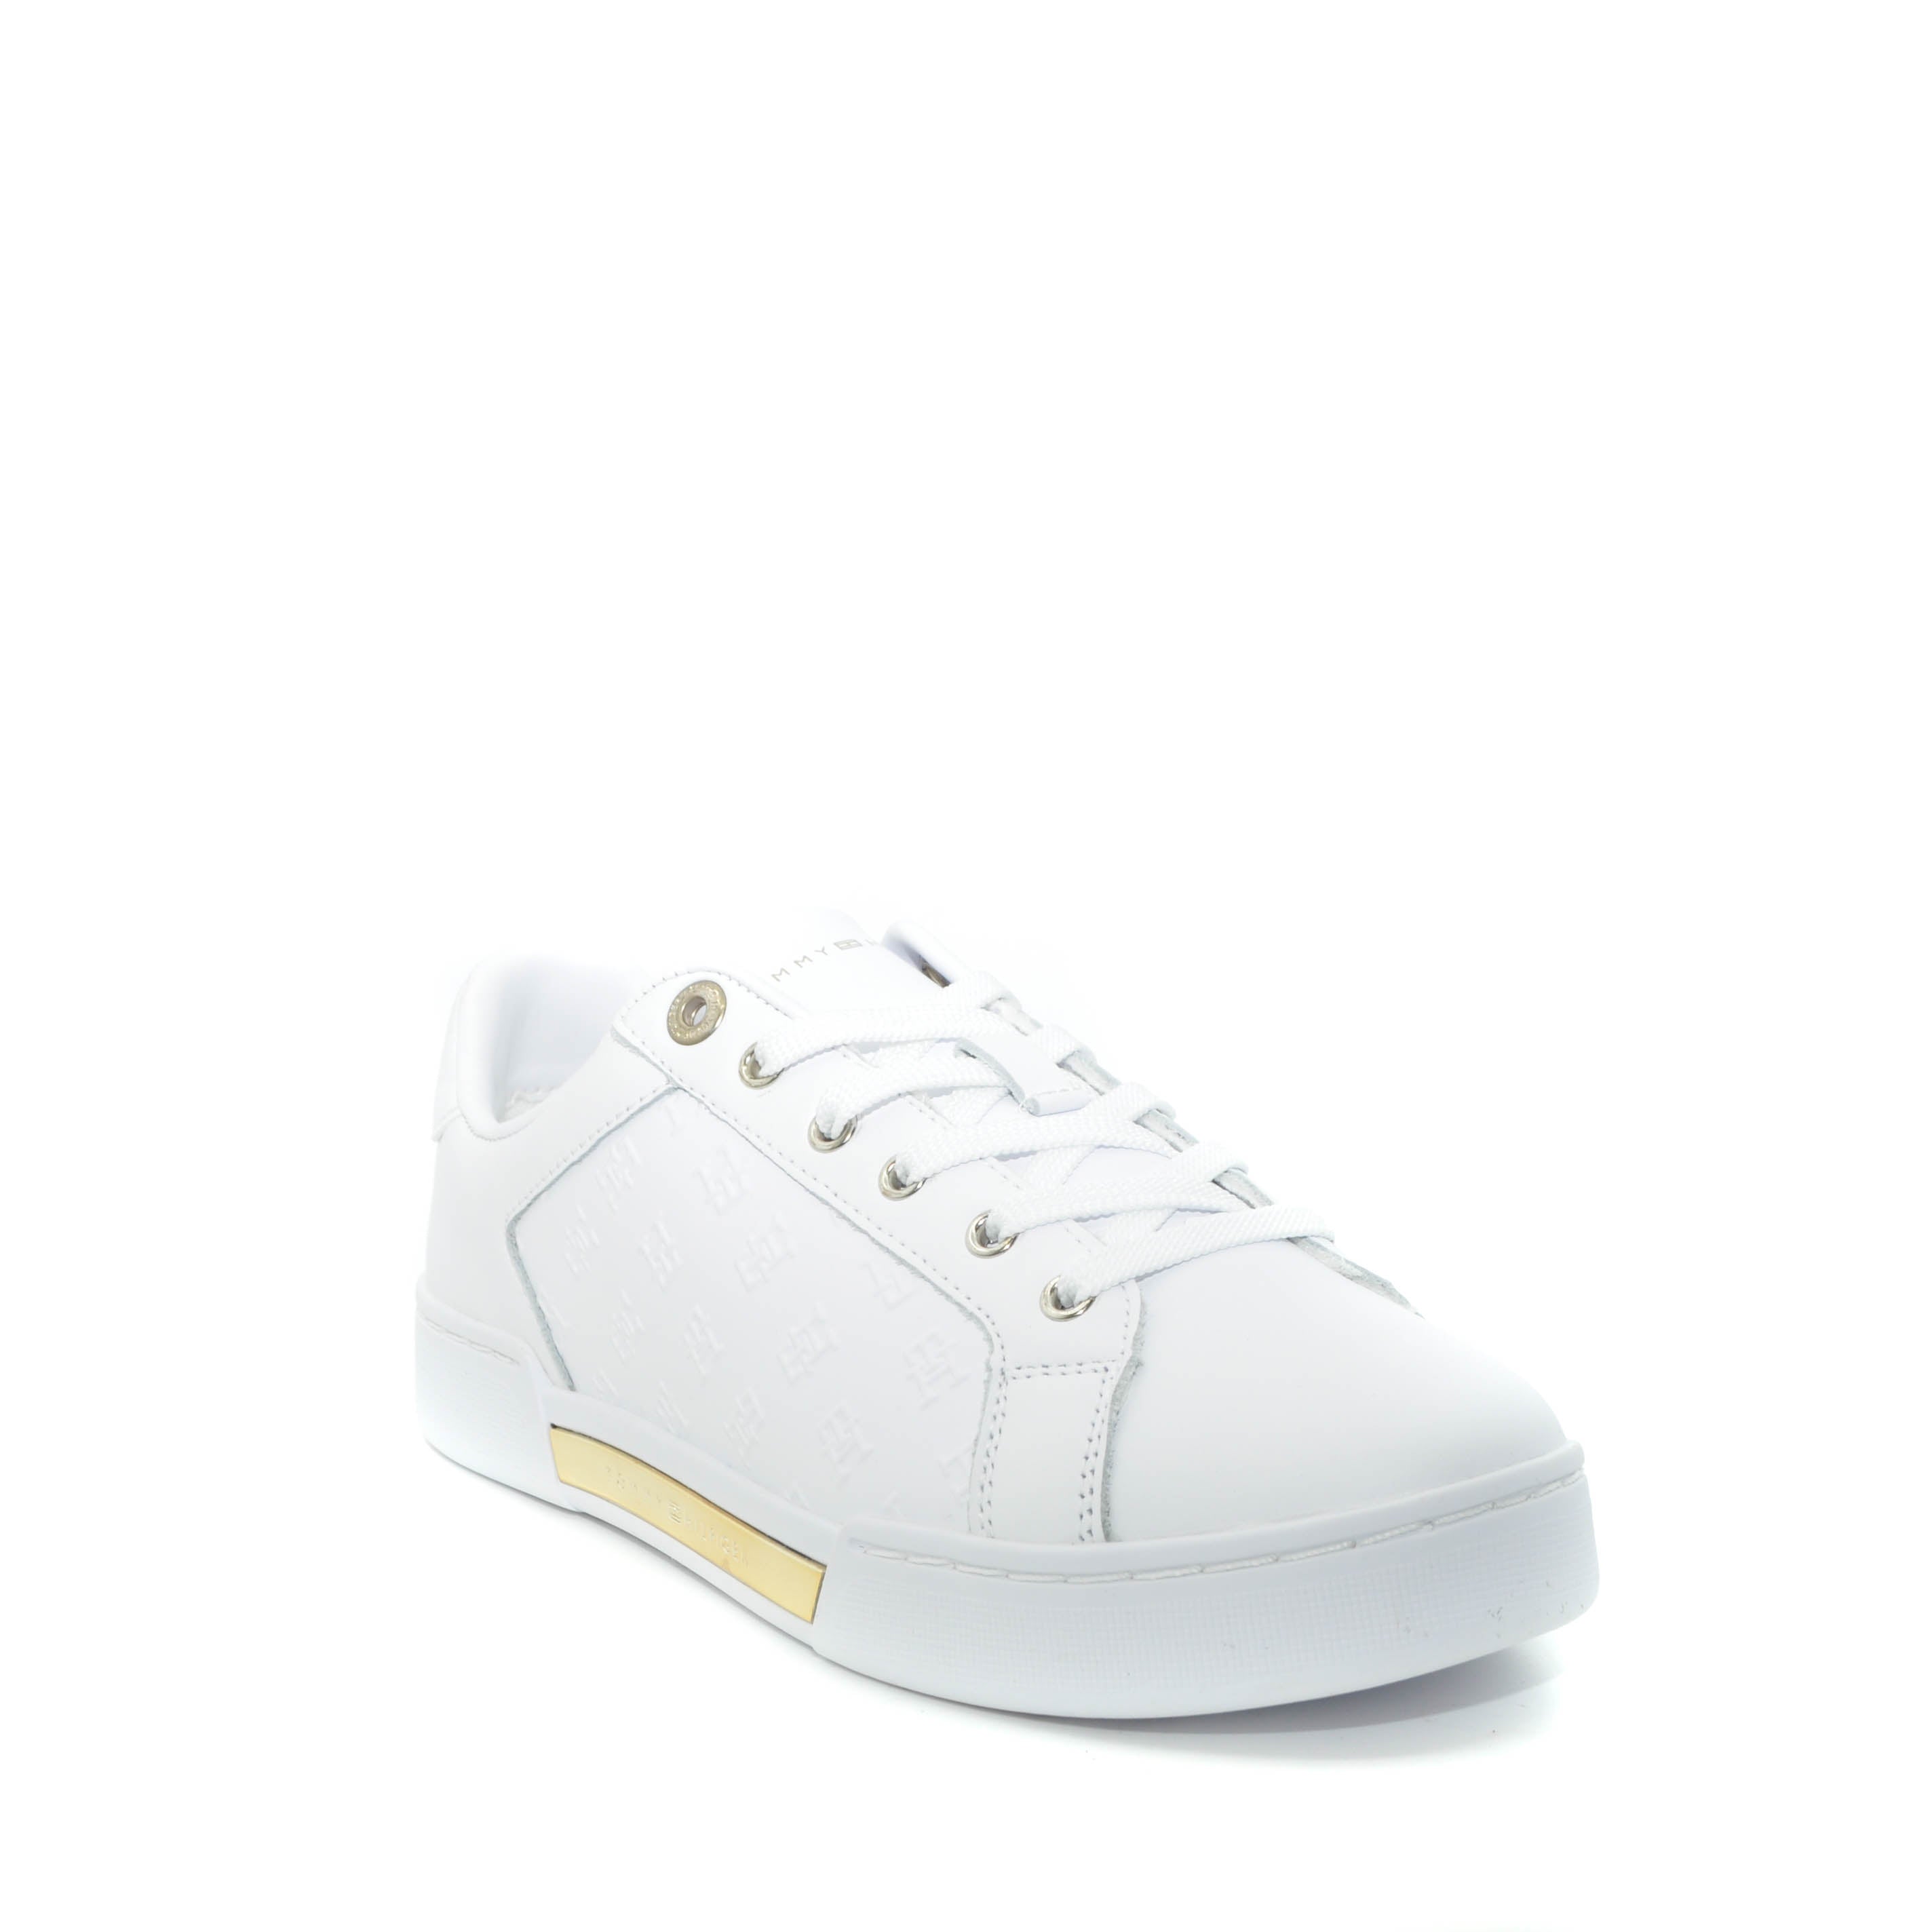 Tommy hilfiger white womens shoes